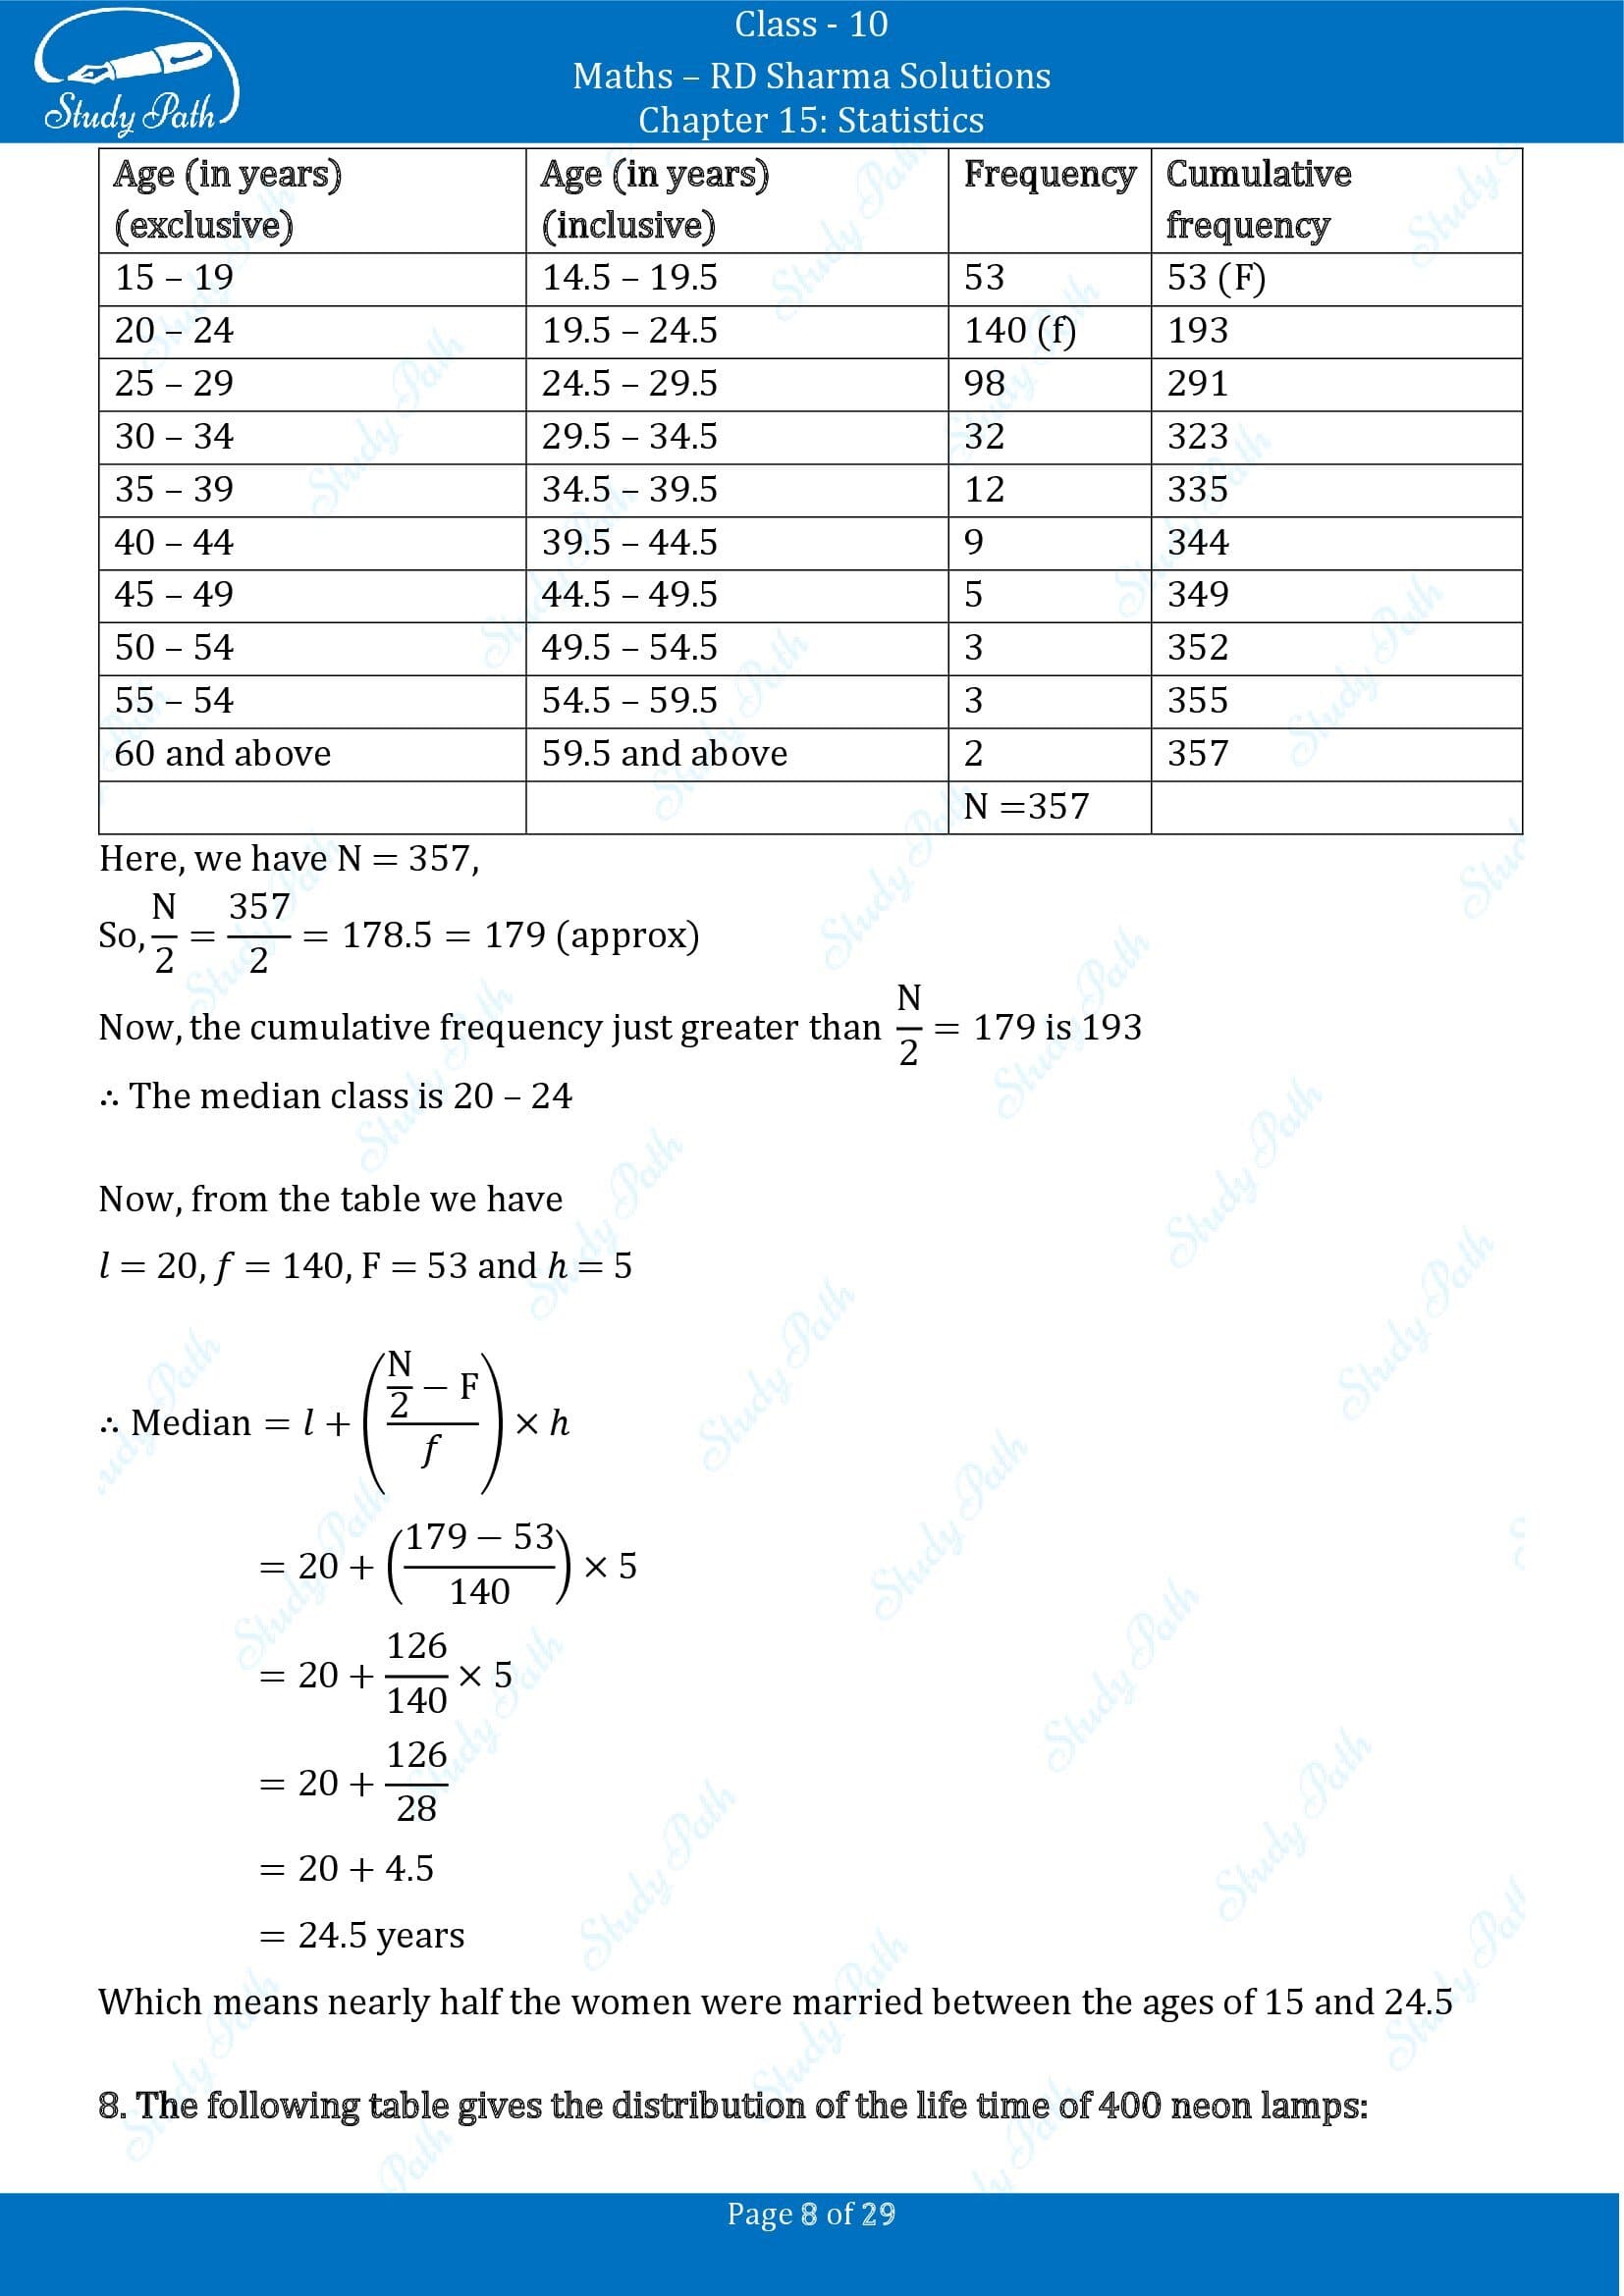 RD Sharma Solutions Class 10 Chapter 15 Statistics Exercise 15.4 00008